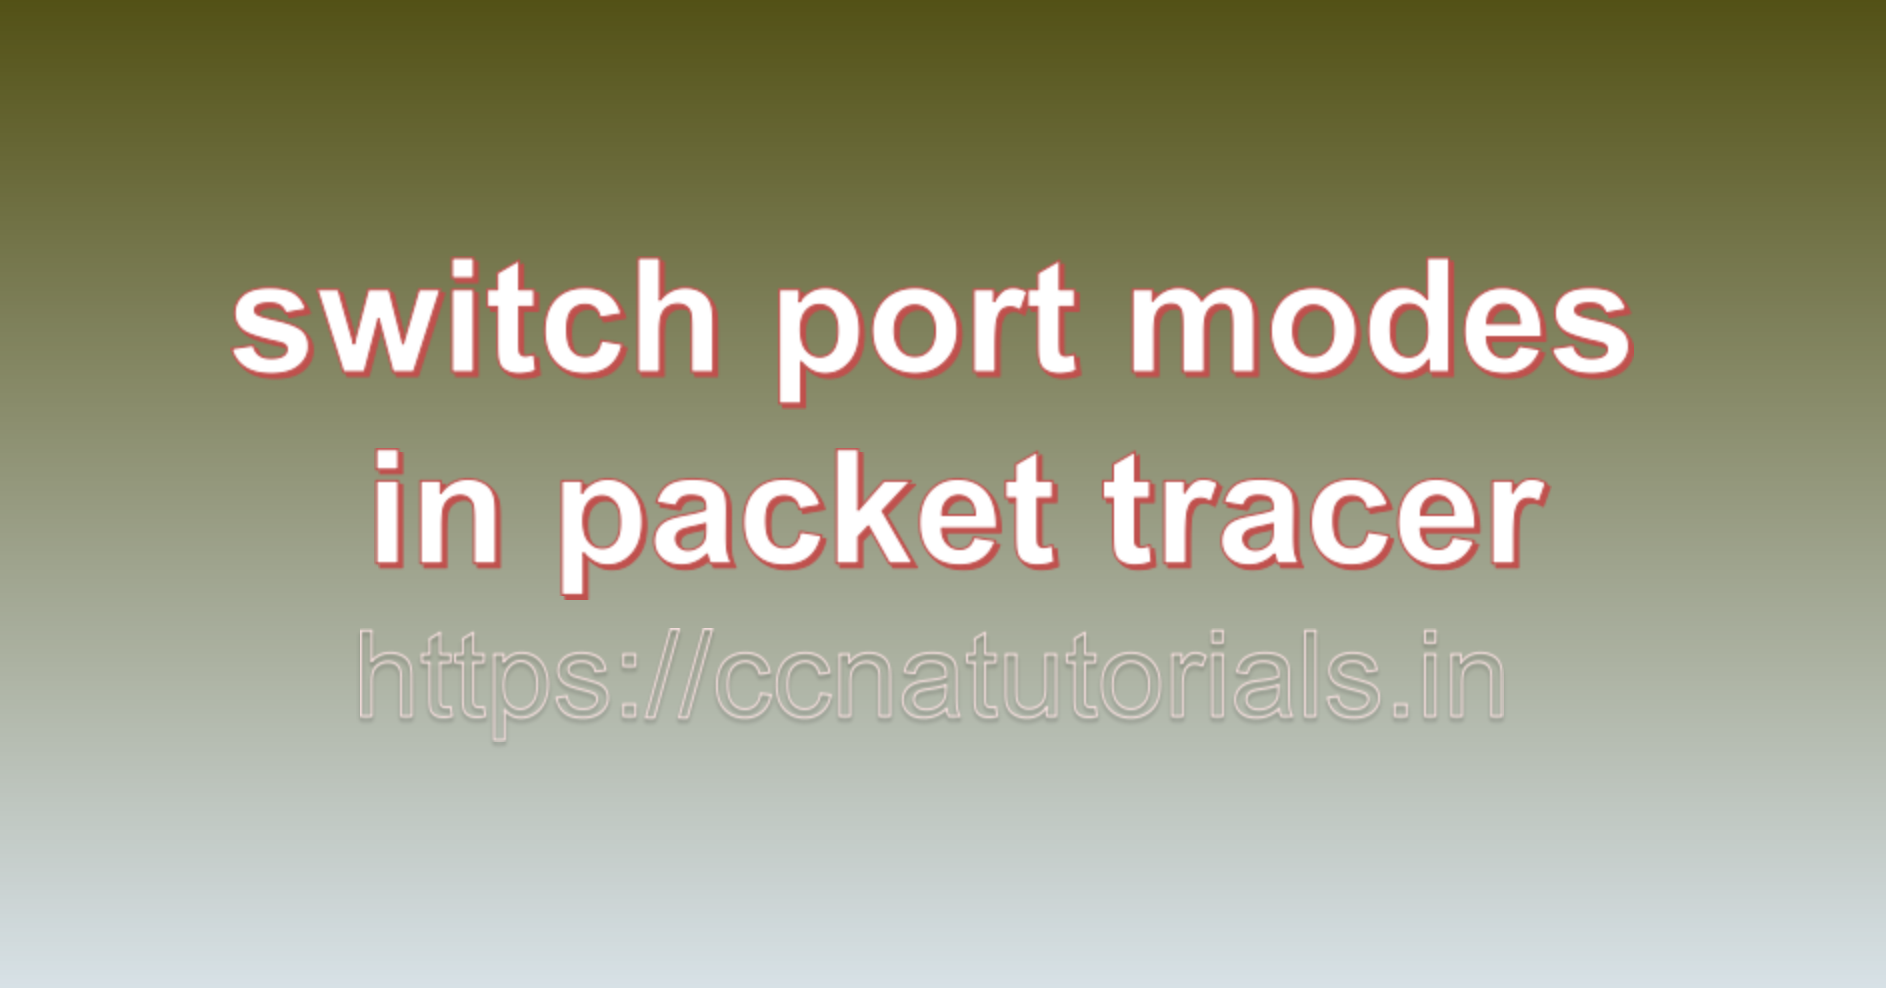 switch port modes in packet tracer, ccna, ccna tutorials